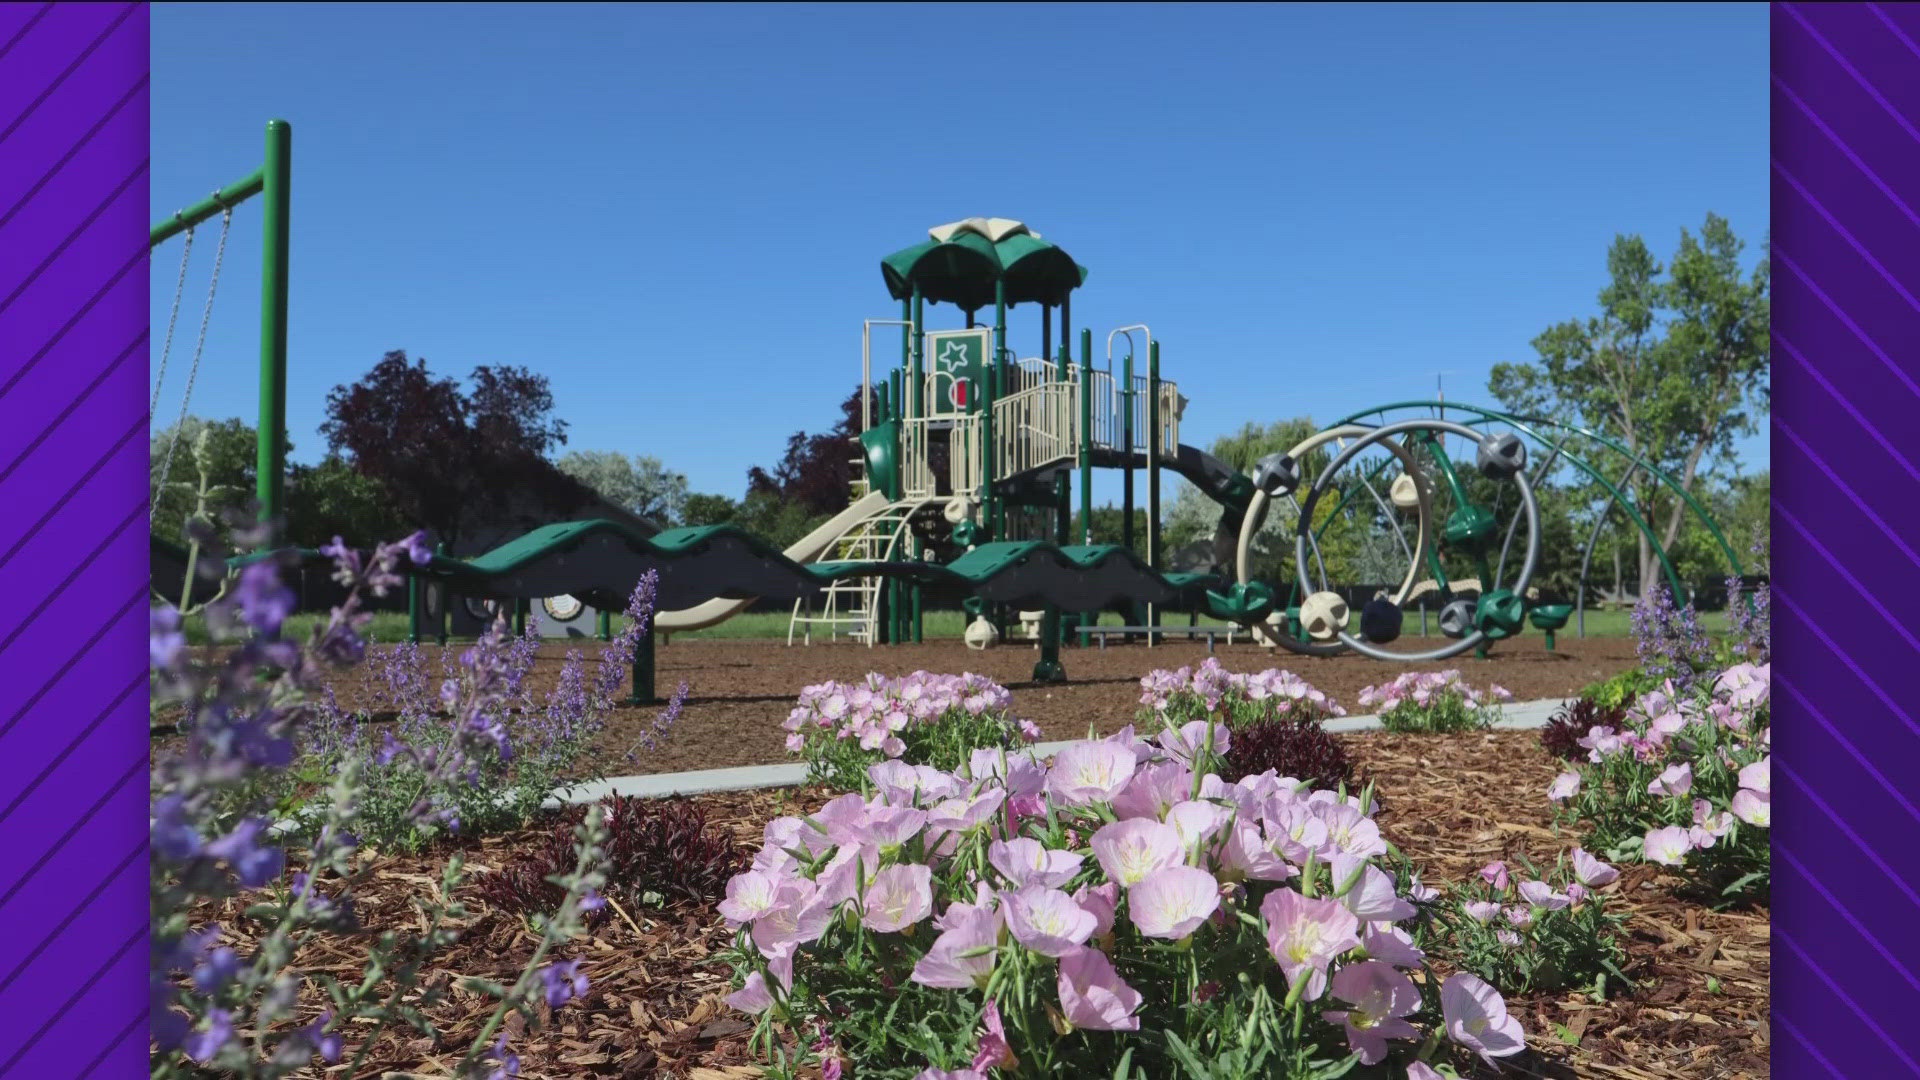 Primrose Park is a 1.5-acre space with a playground, open play areas, an outdoor fitness center and accessible parking for ADA vans.